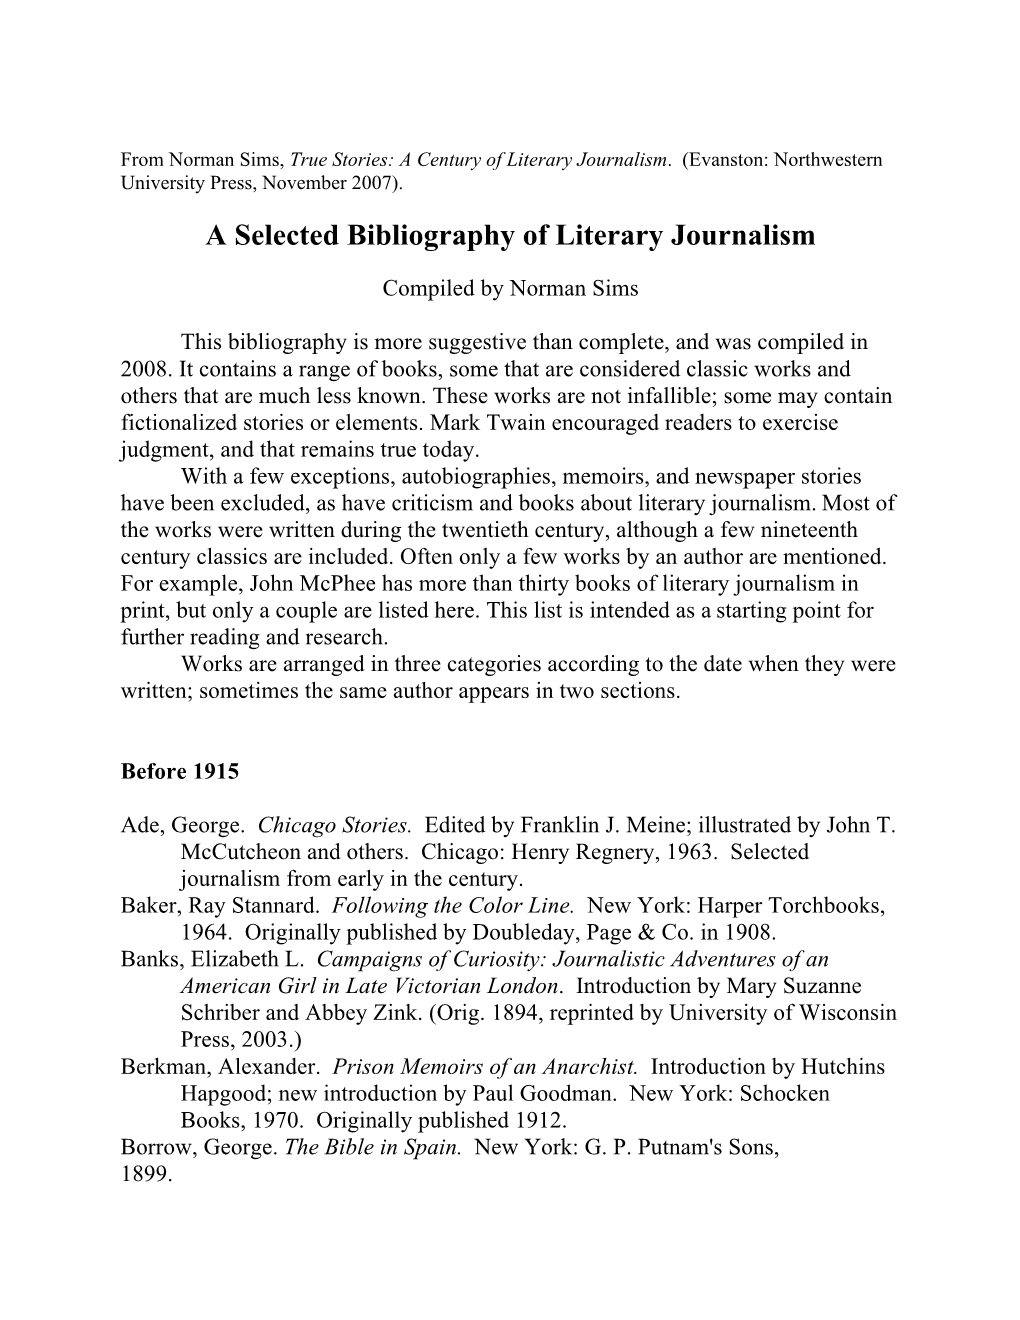 A Selected Bibliography of Literary Journalism